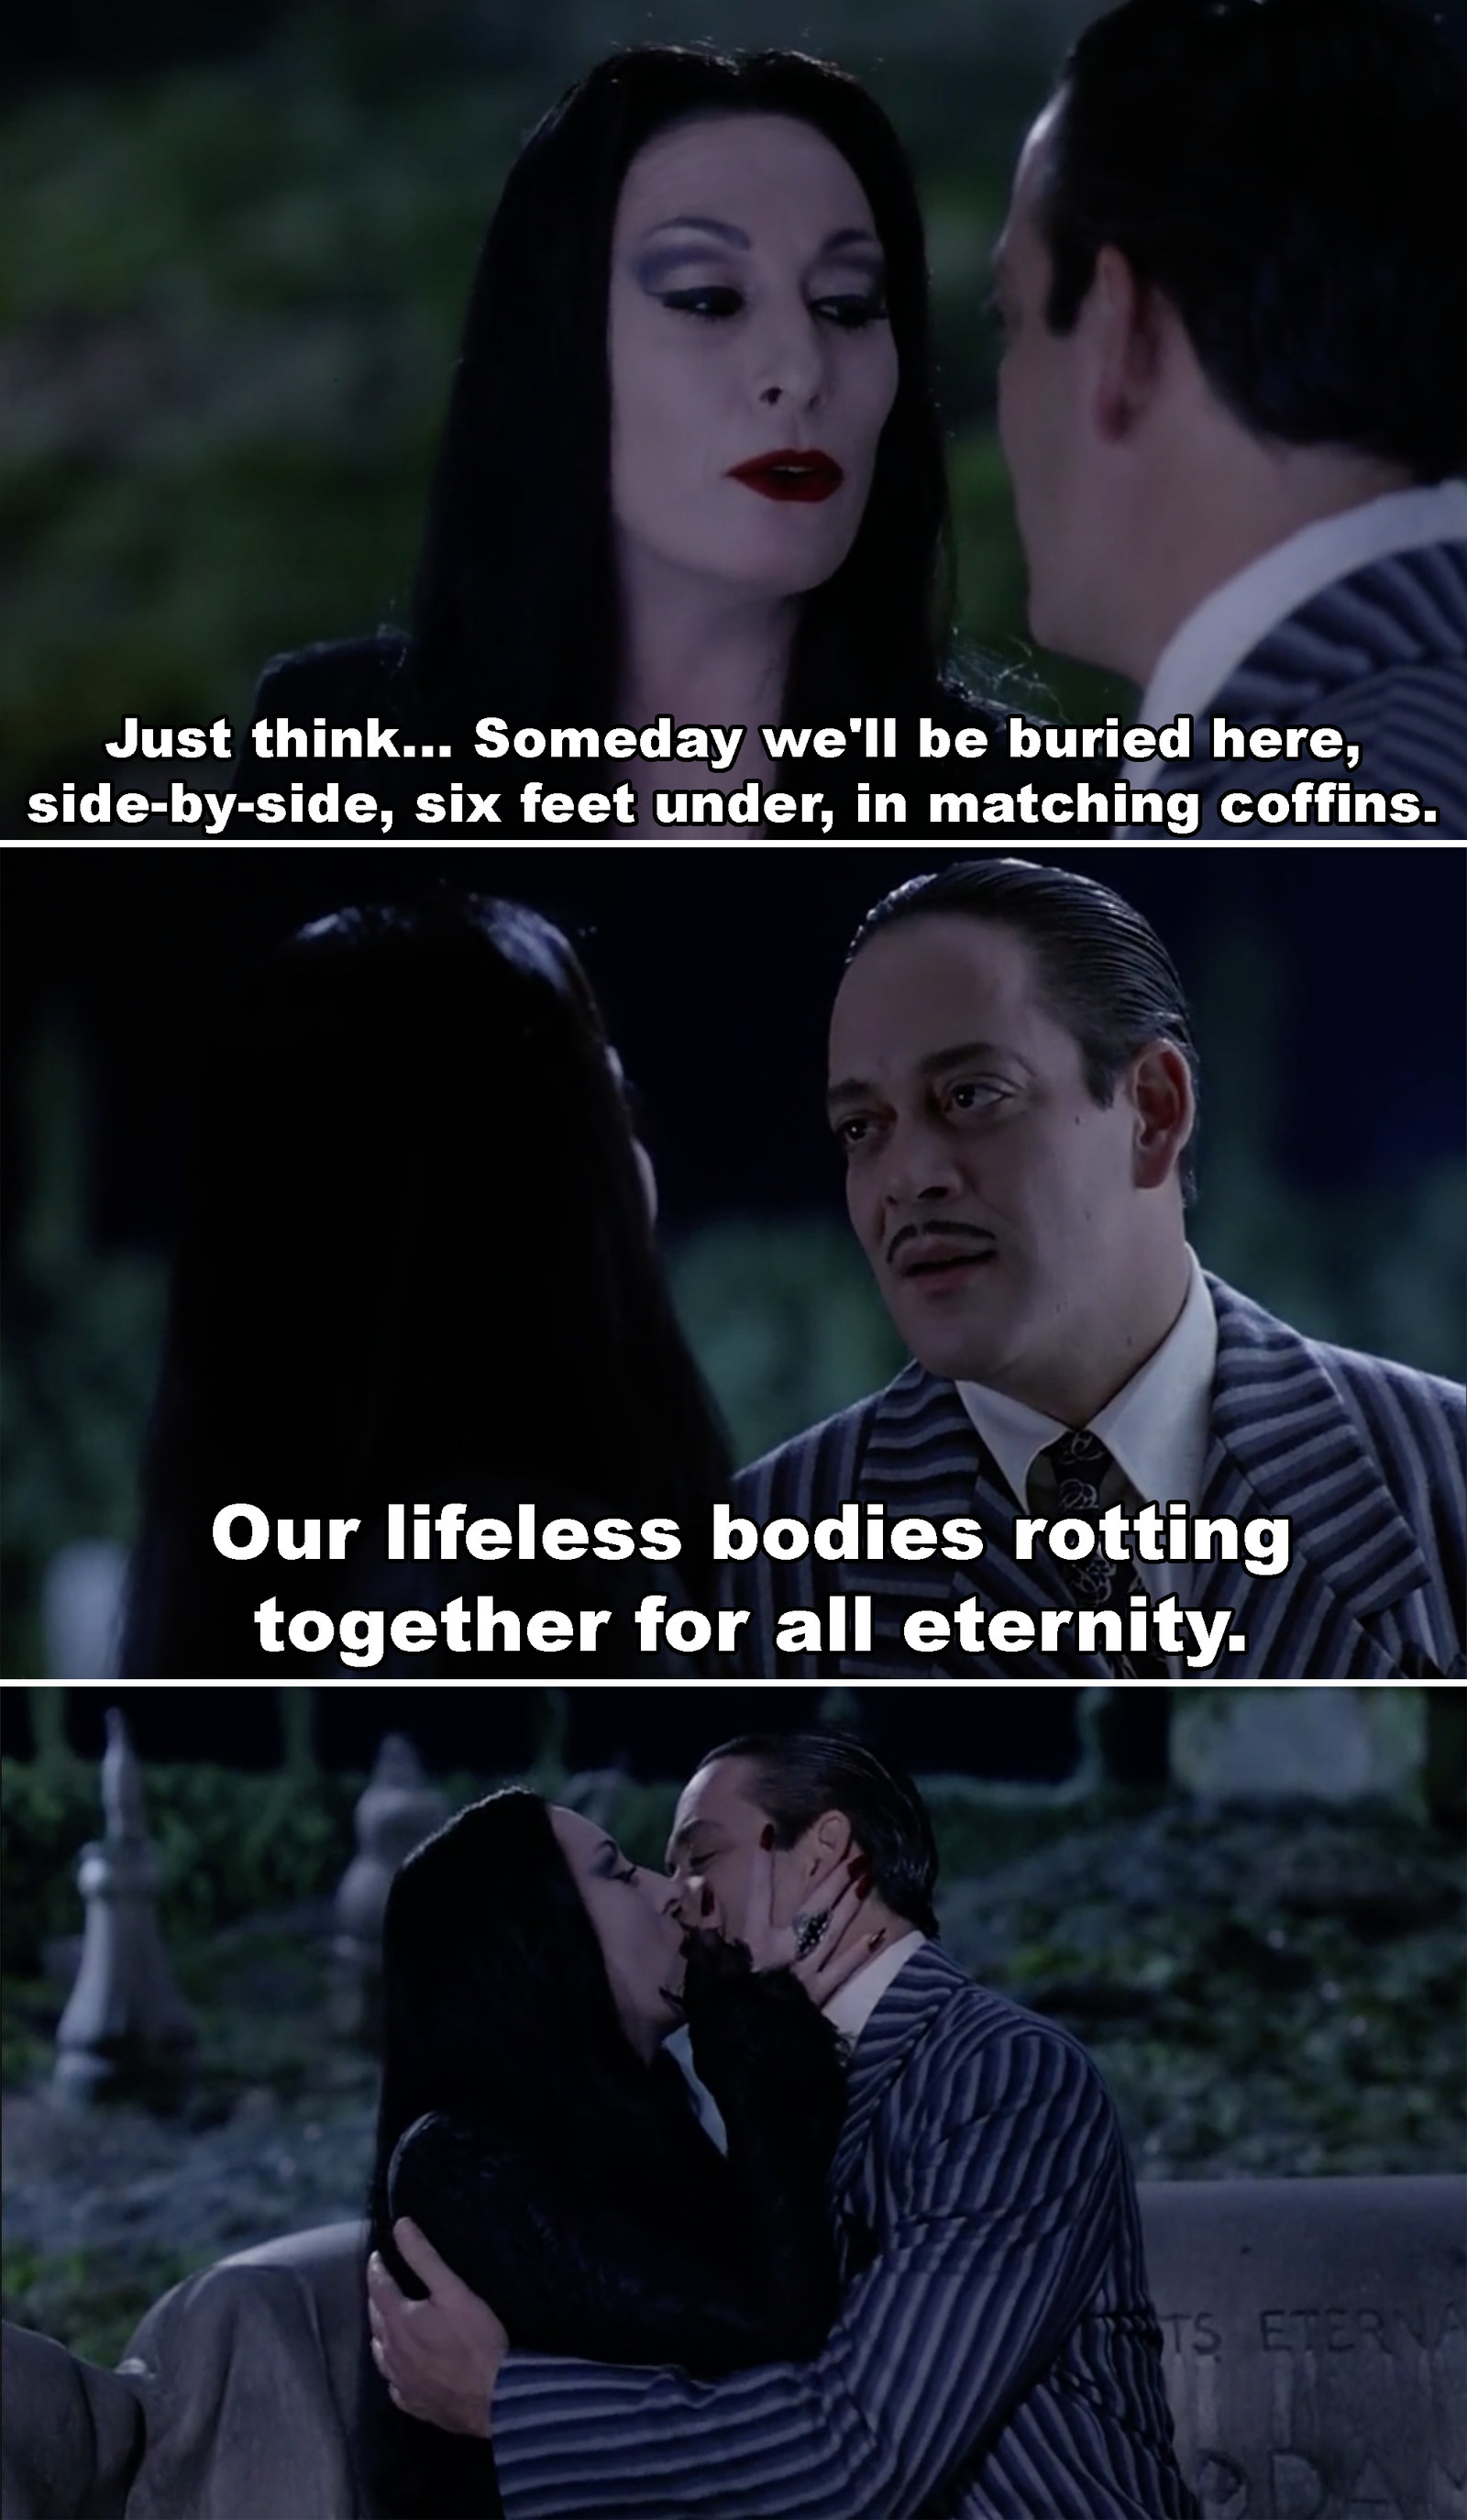 Relationship gomez and morticia 'The Addams